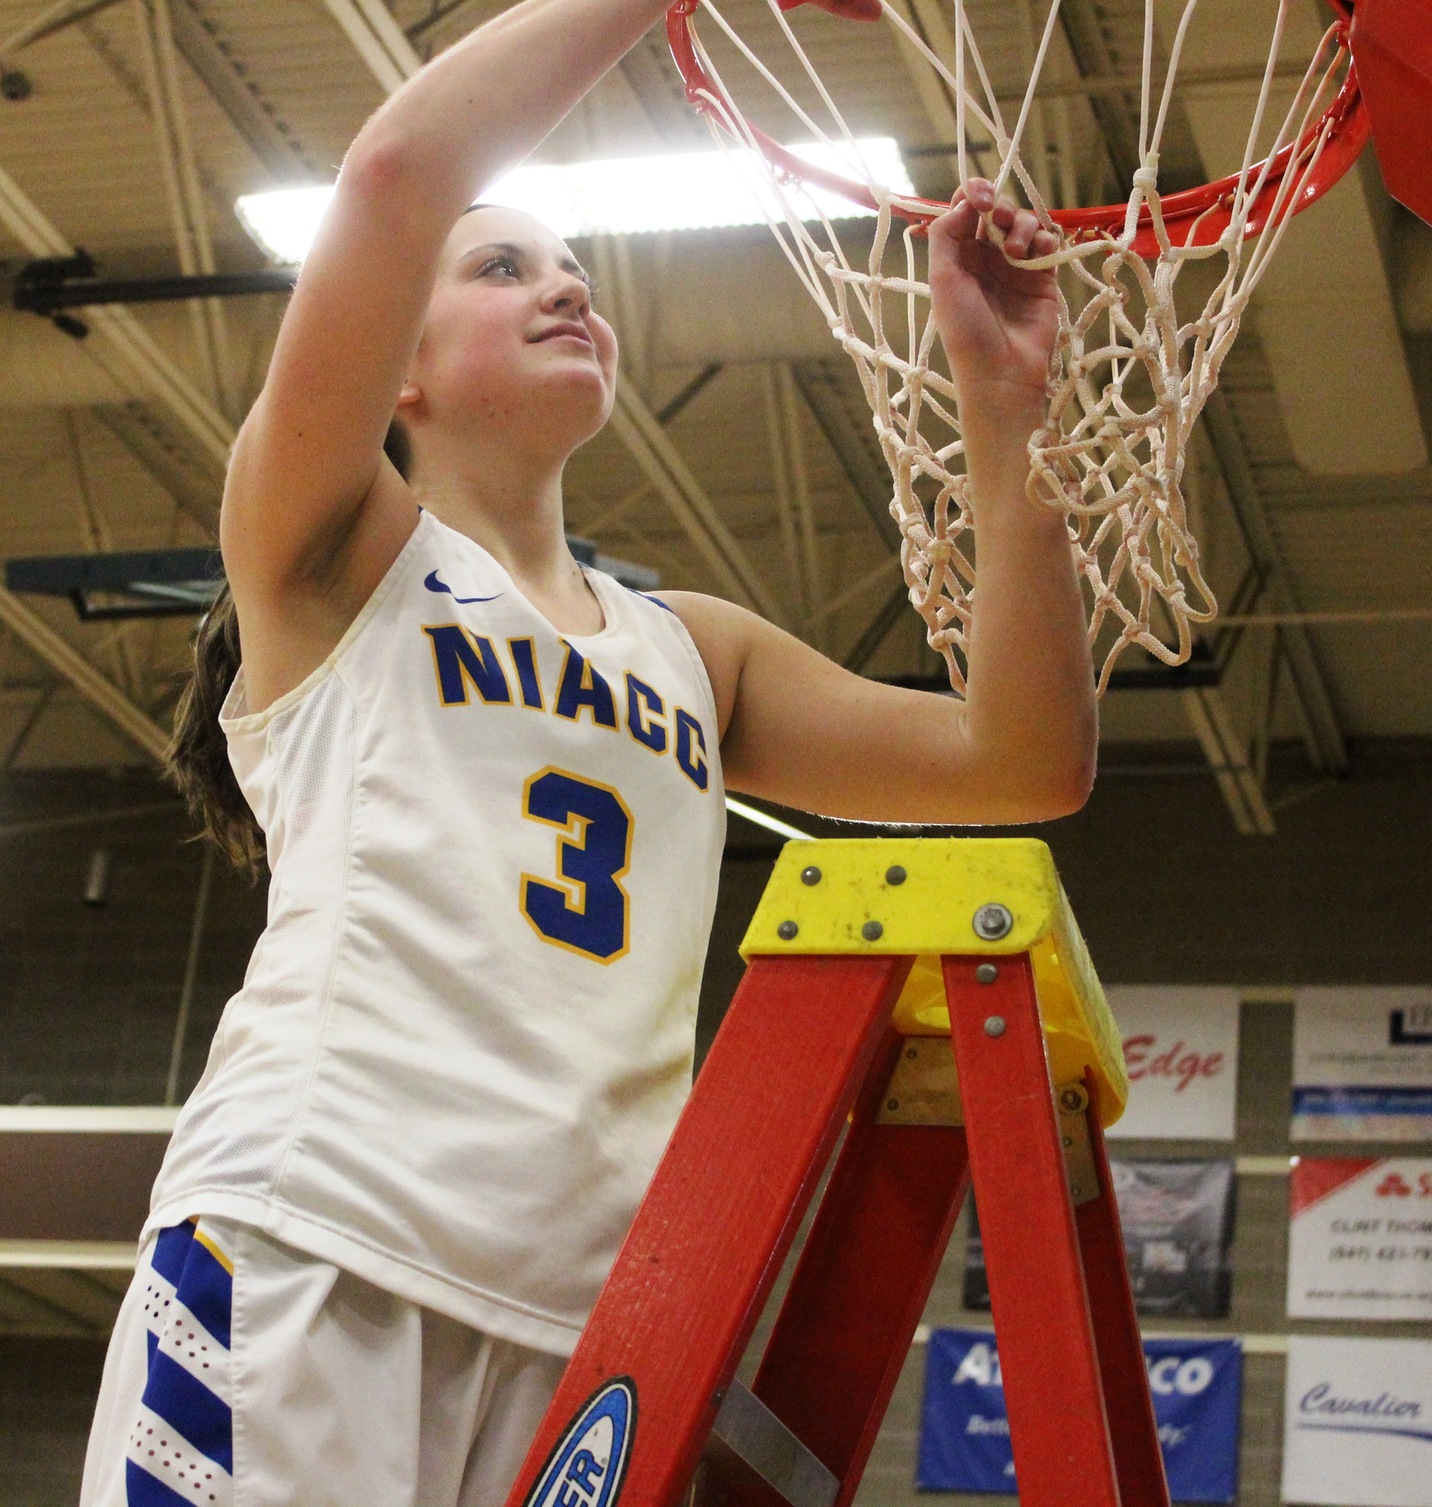 NIACC's Mandy Willems takes her turn cutting down the net after winning the regional title on Sunday in the NIACC gym.